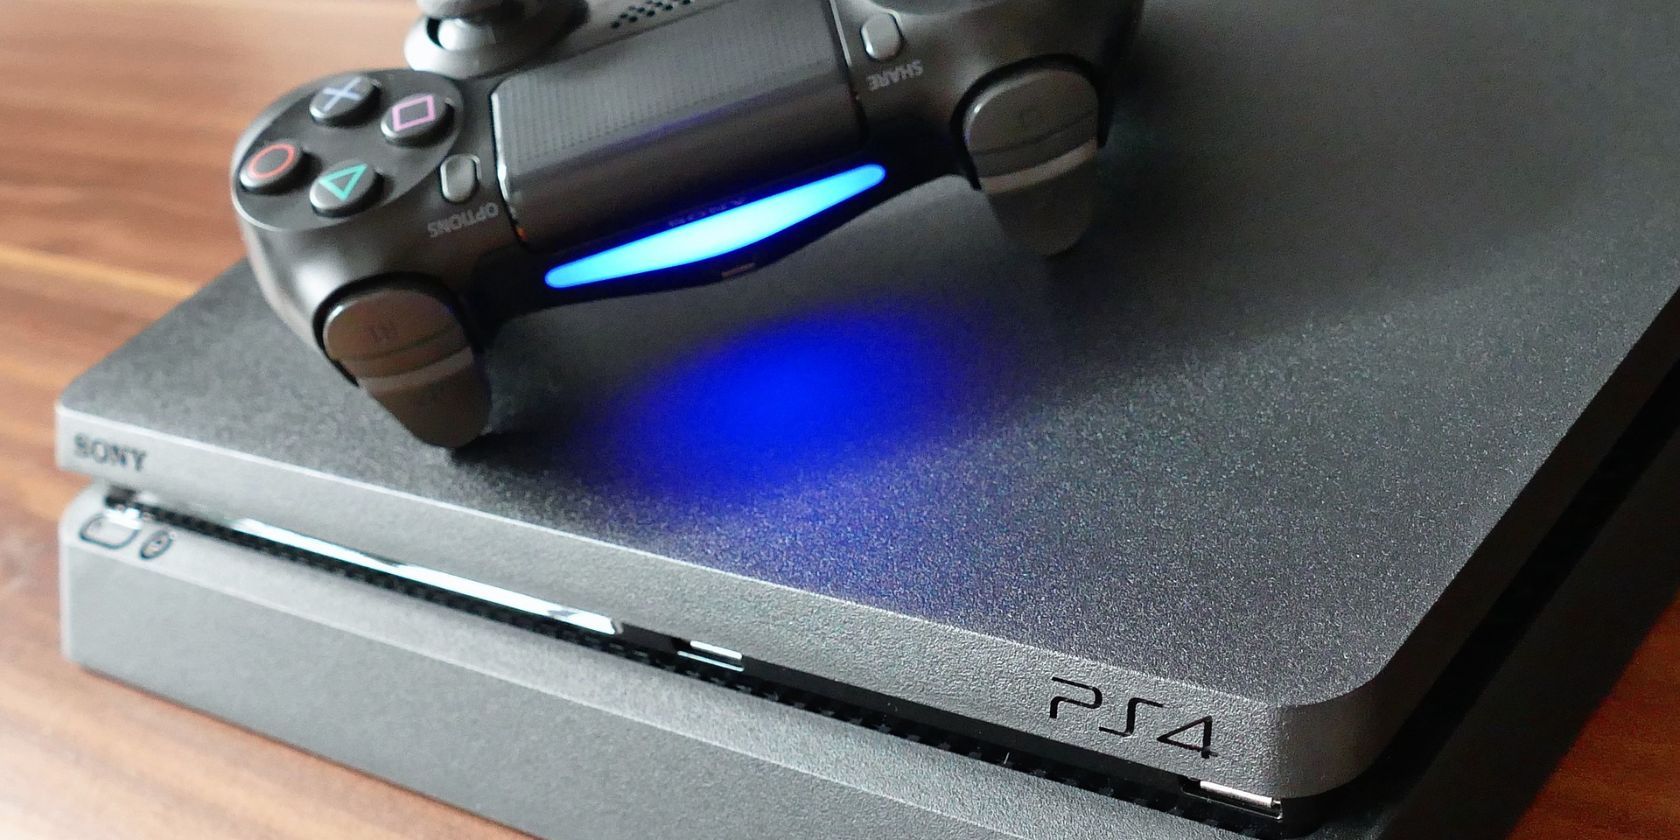 A PS4 controller on top of a PS4 console